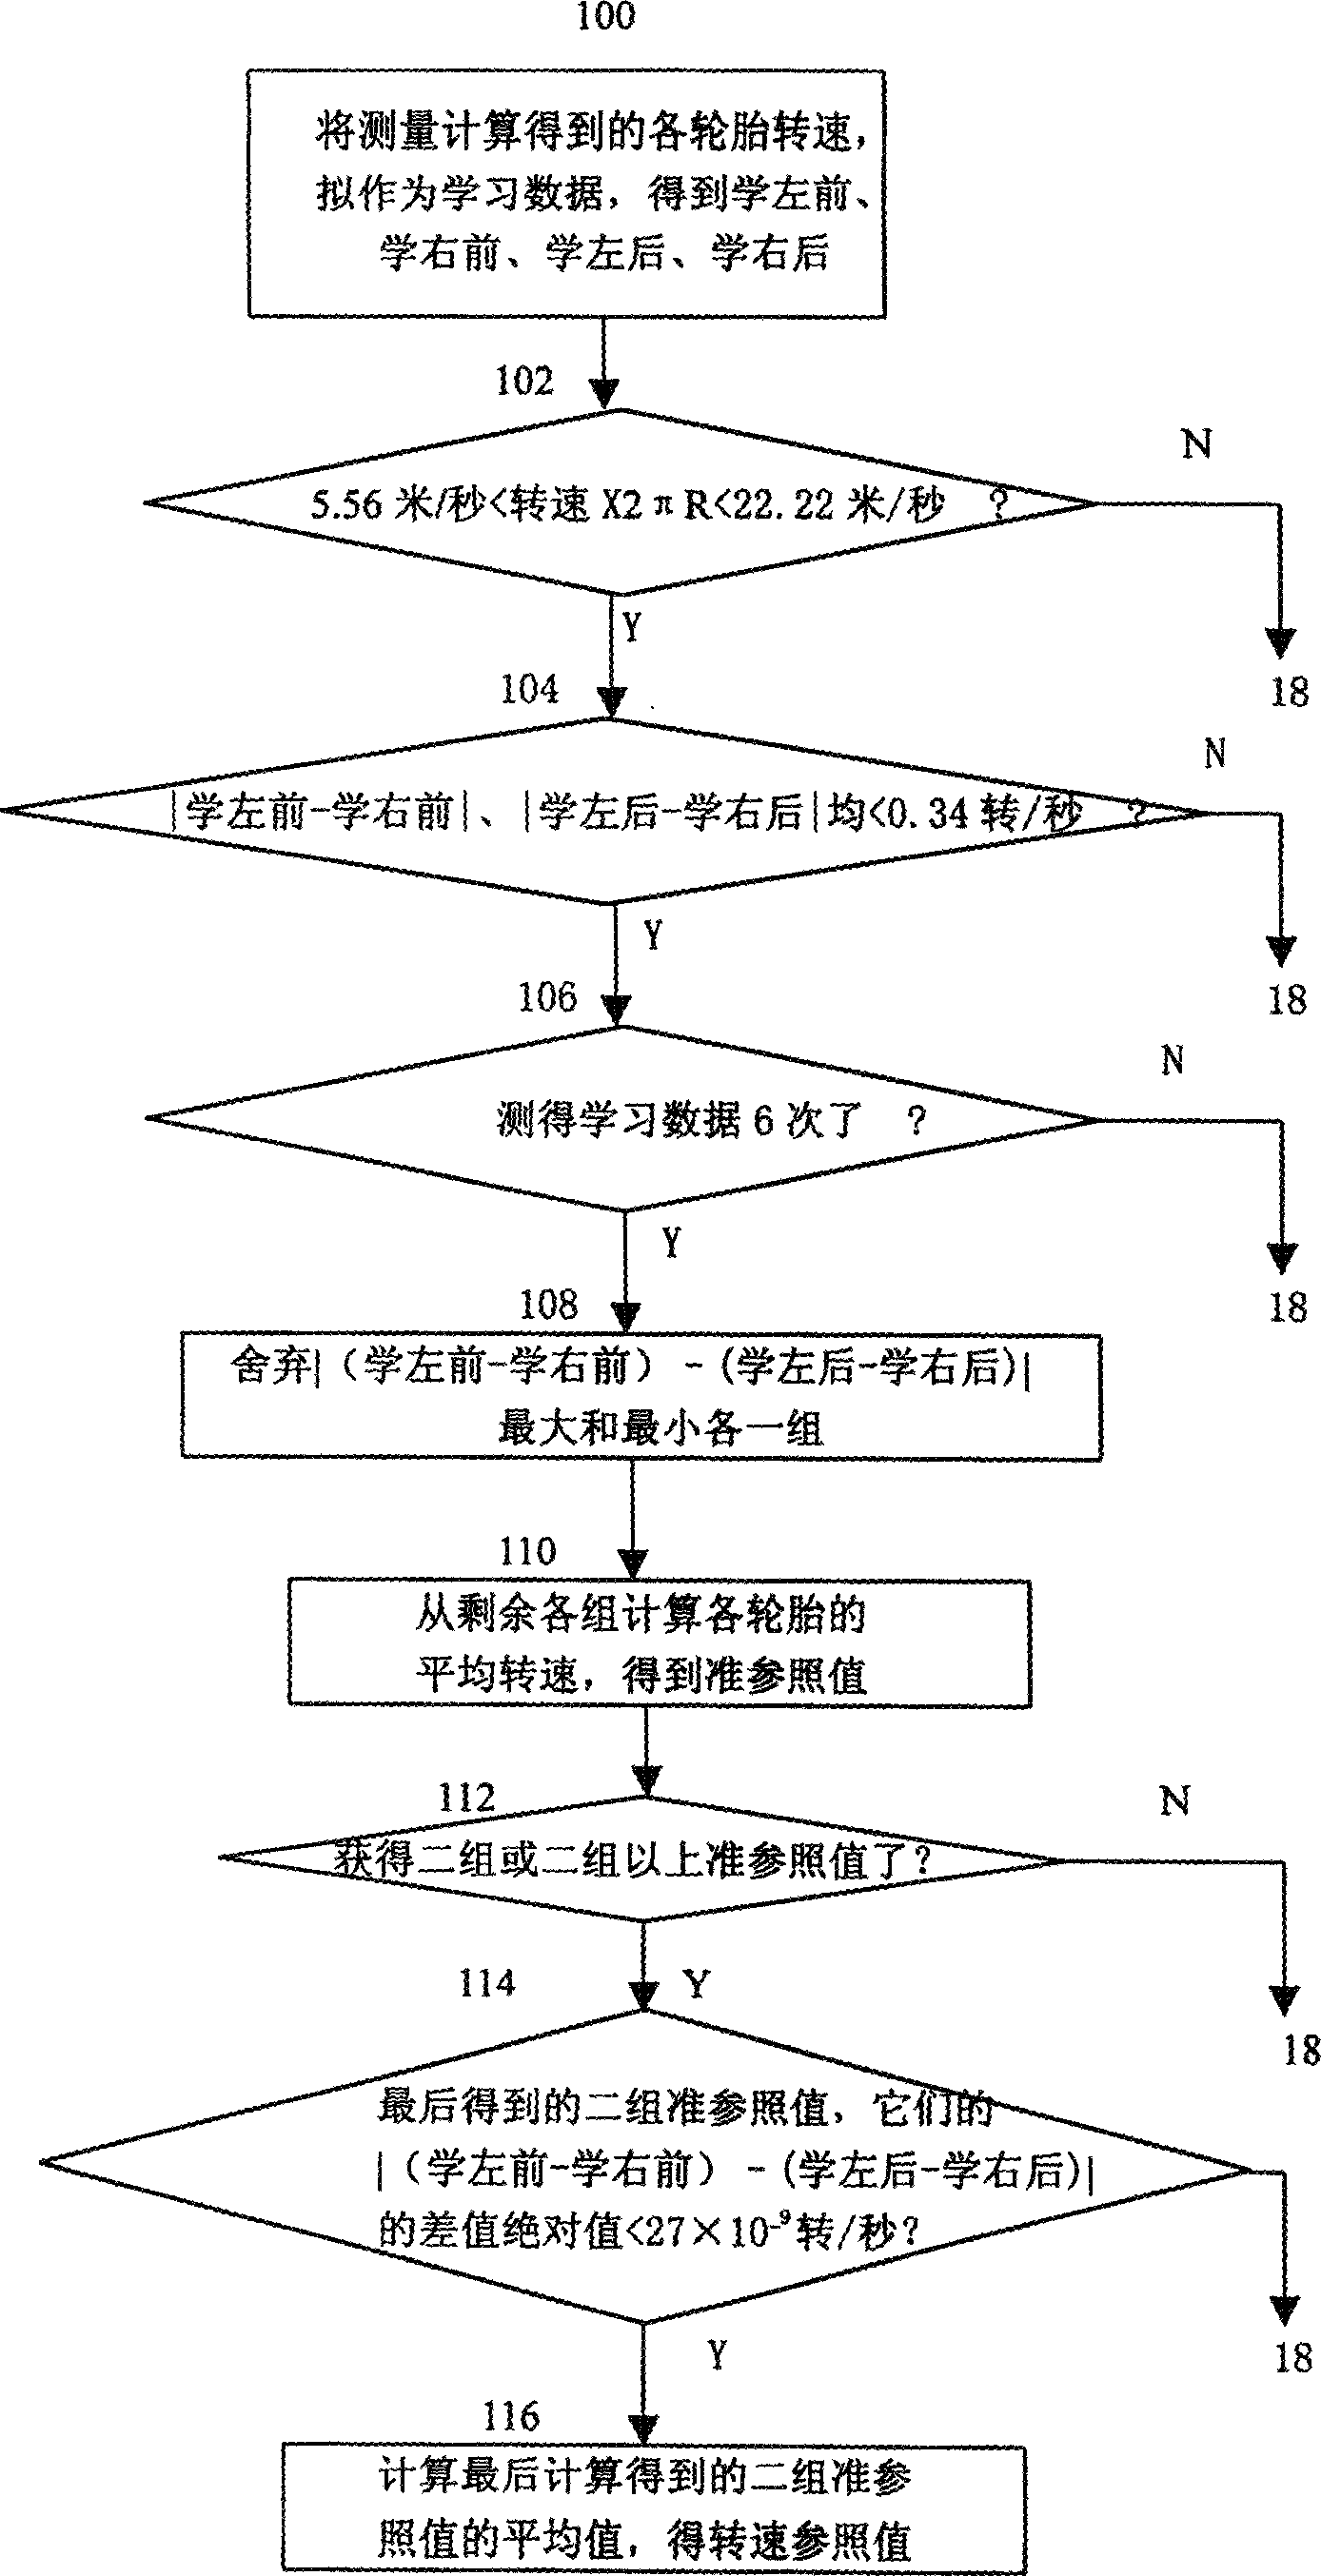 Method for monitoring pressure vehicle tyre and system of realizing said method